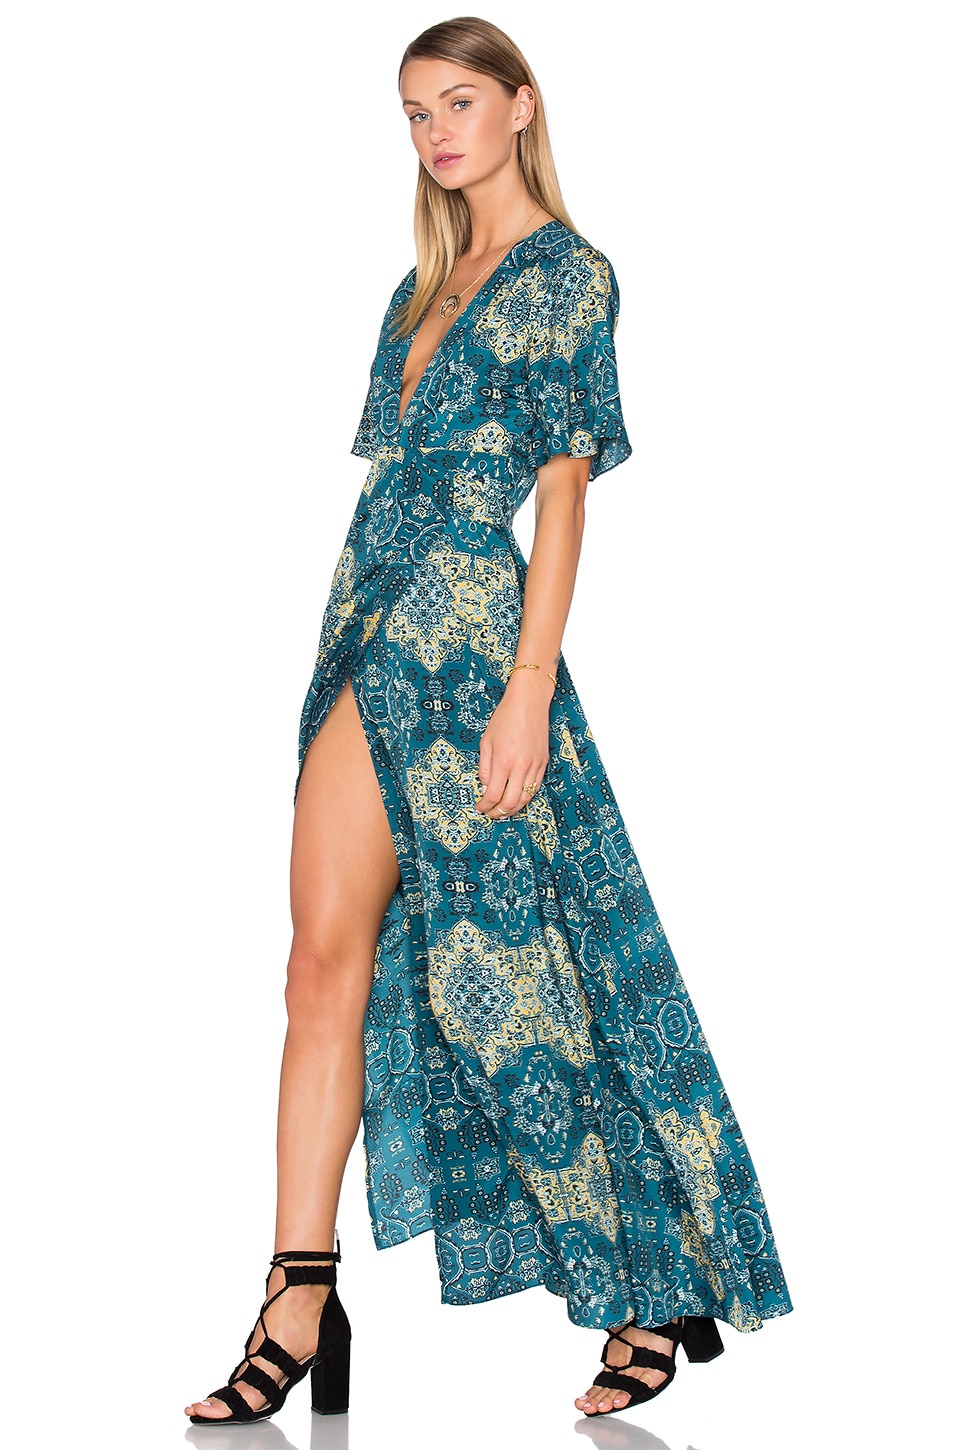 House of Harlow 1960 x REVOLVE Blaire Wrap Maxi in Moroccan Tile Print ...